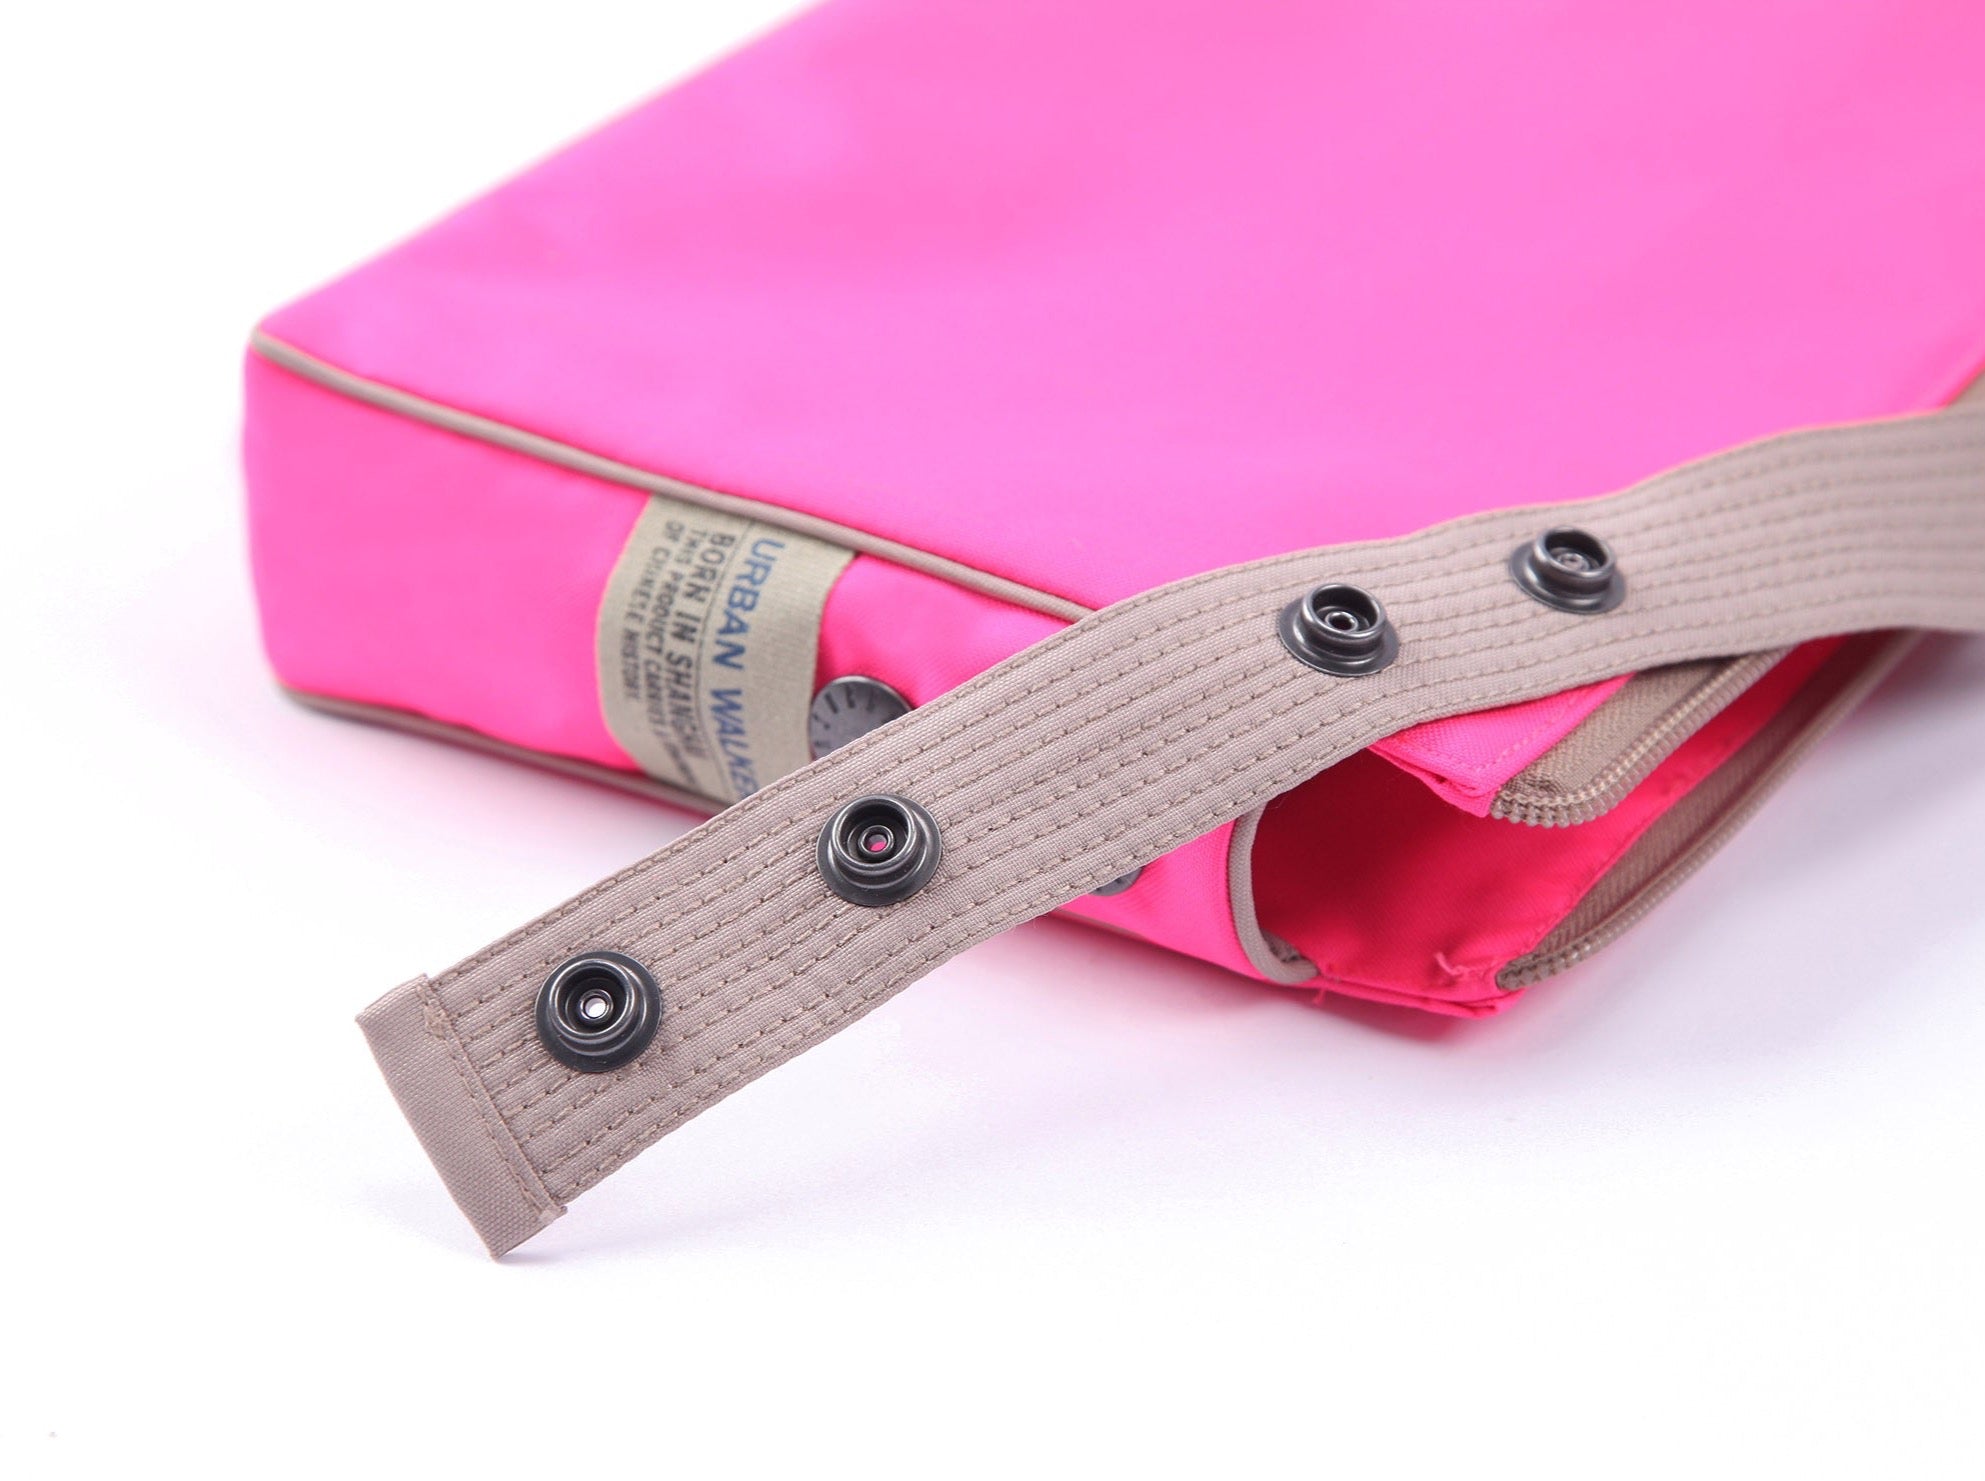 a neon pink recycled crossbody bag